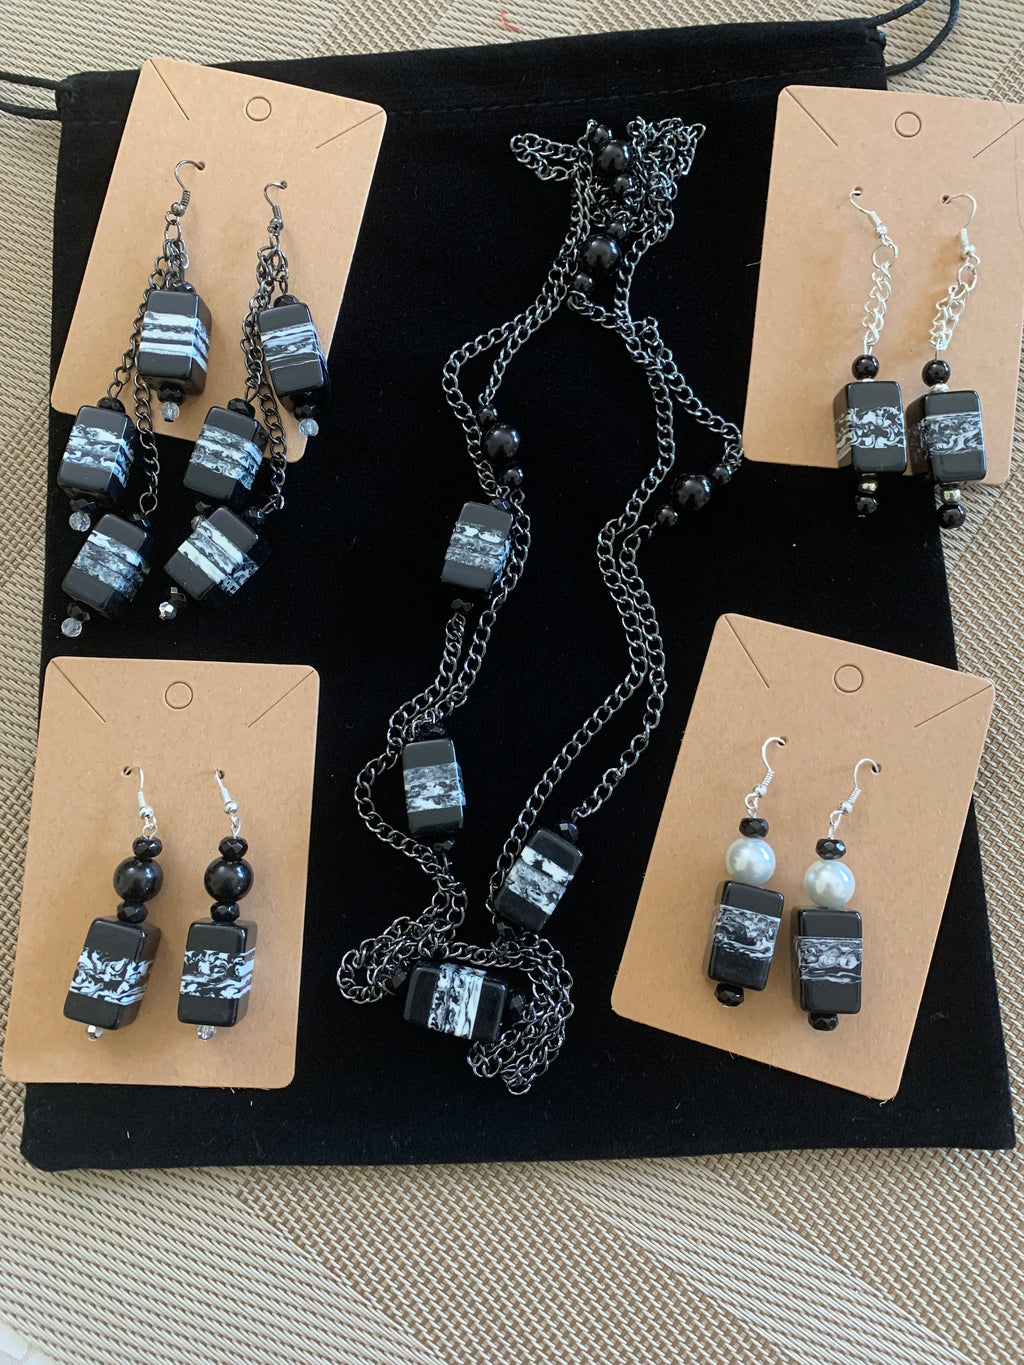 5 Piece Necklace/Earring Set-Black and White Beads